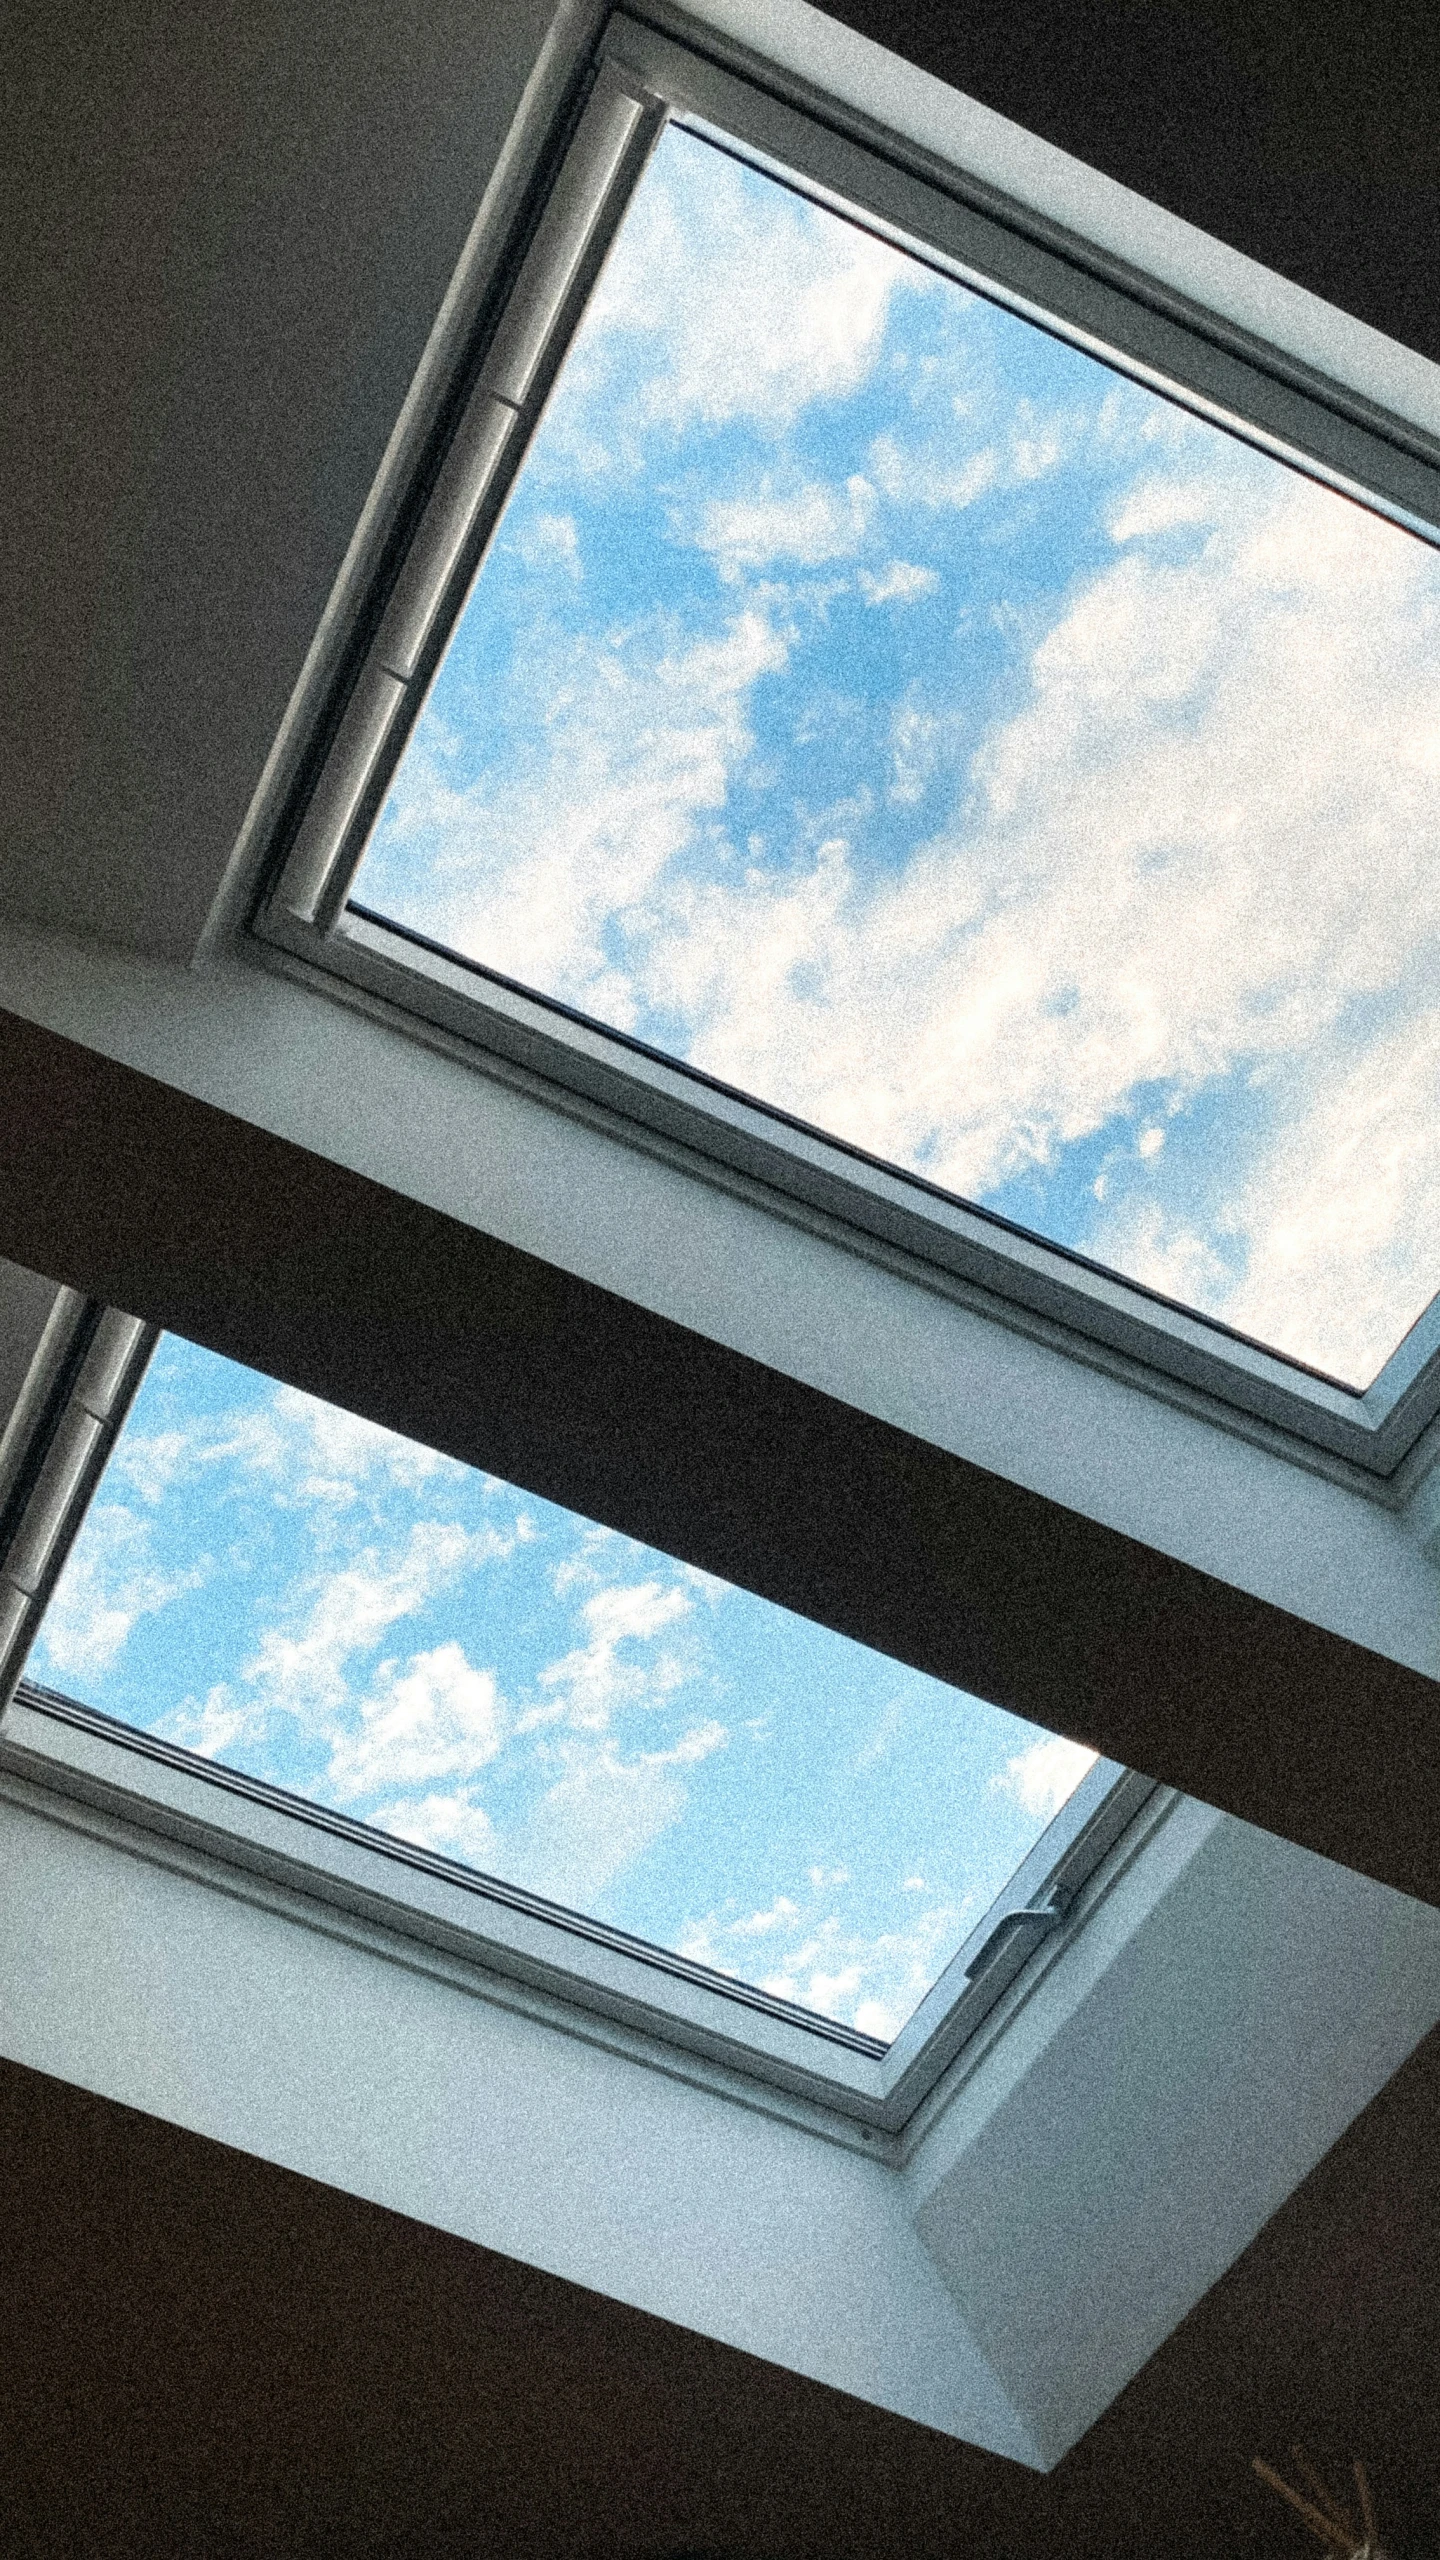 the sky through the open roof tiles in the room